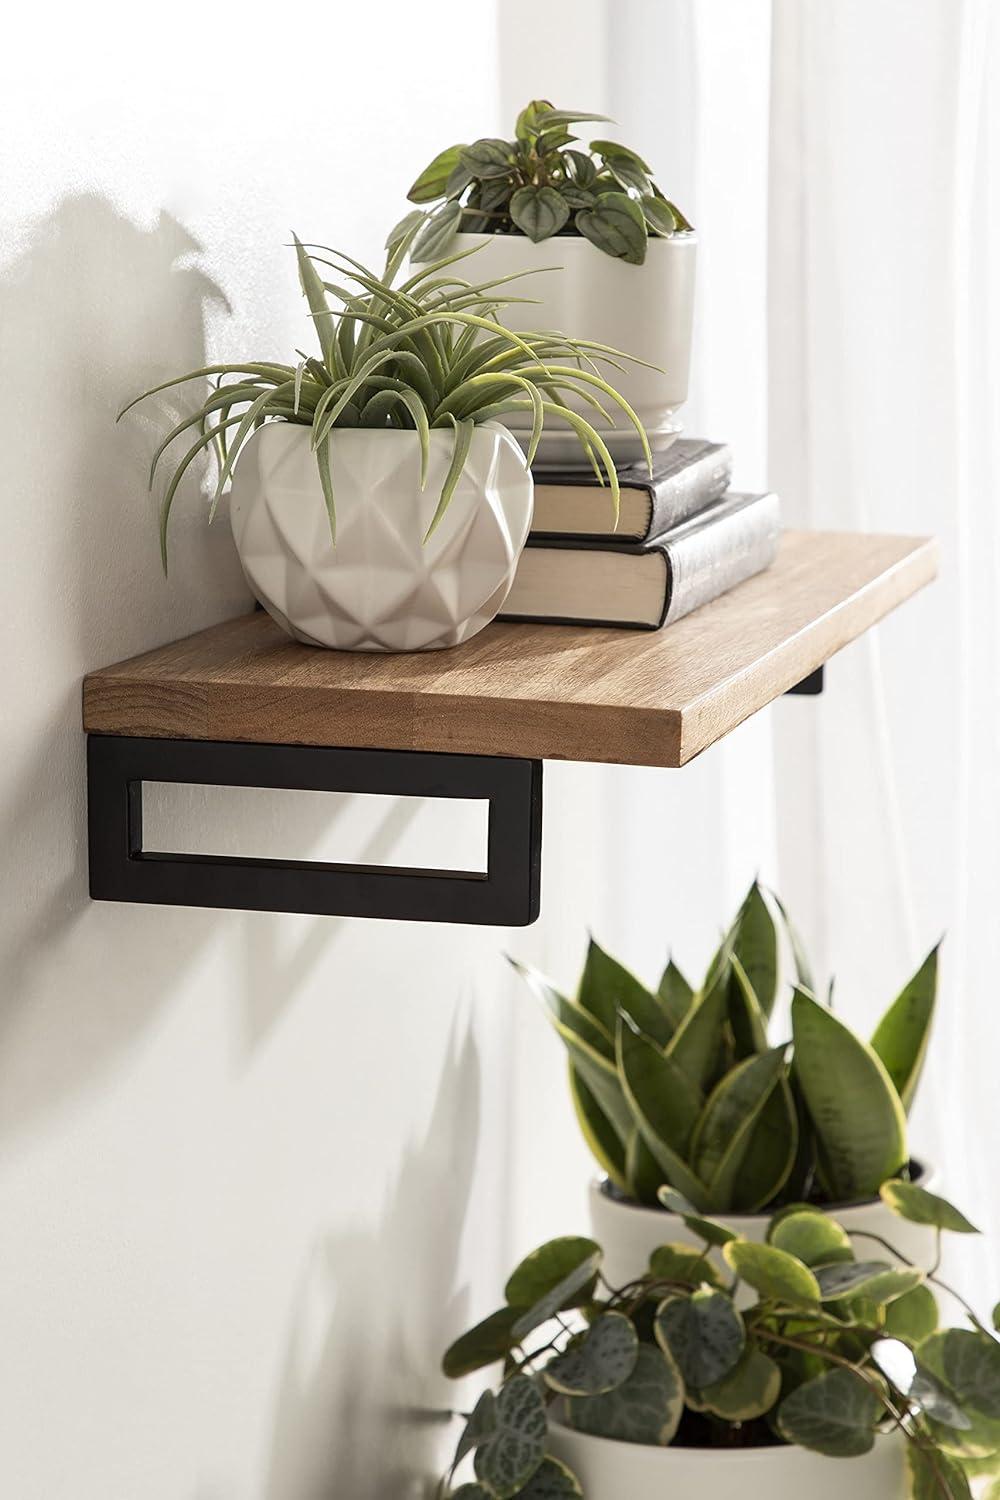 Lankford 24" Natural Wood and Black Modern Floating Wall Shelf